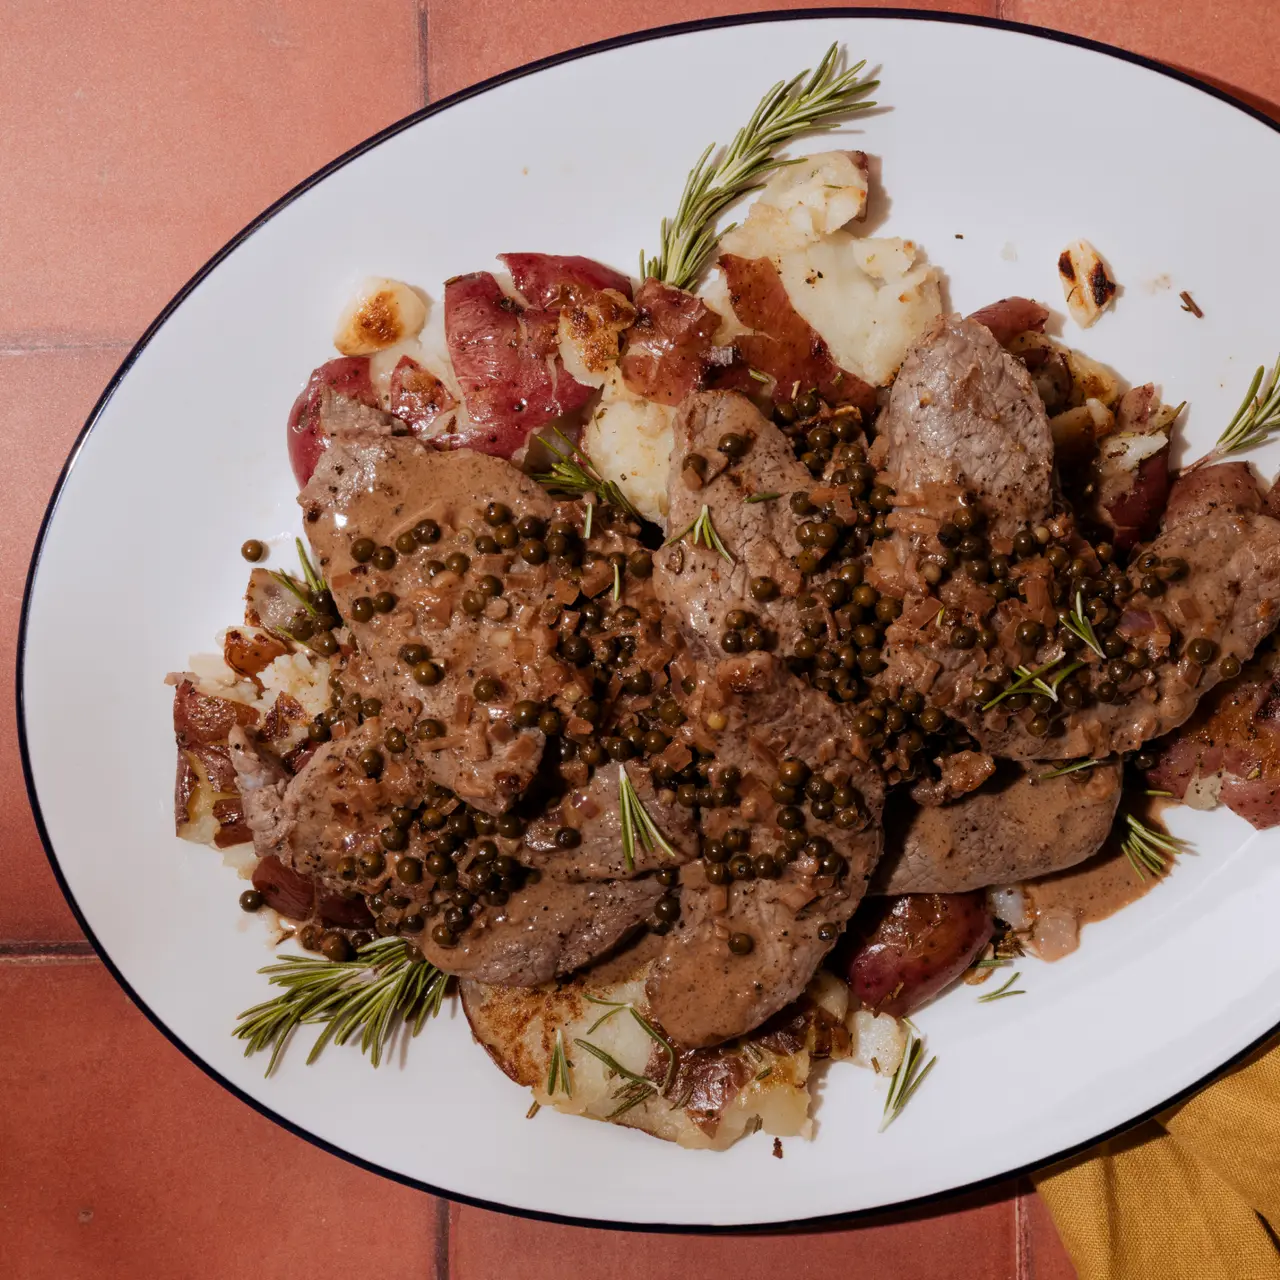 A plate of sliced beef with a peppercorn sauce, garnished with herbs, presented on a white-rimmed plate.